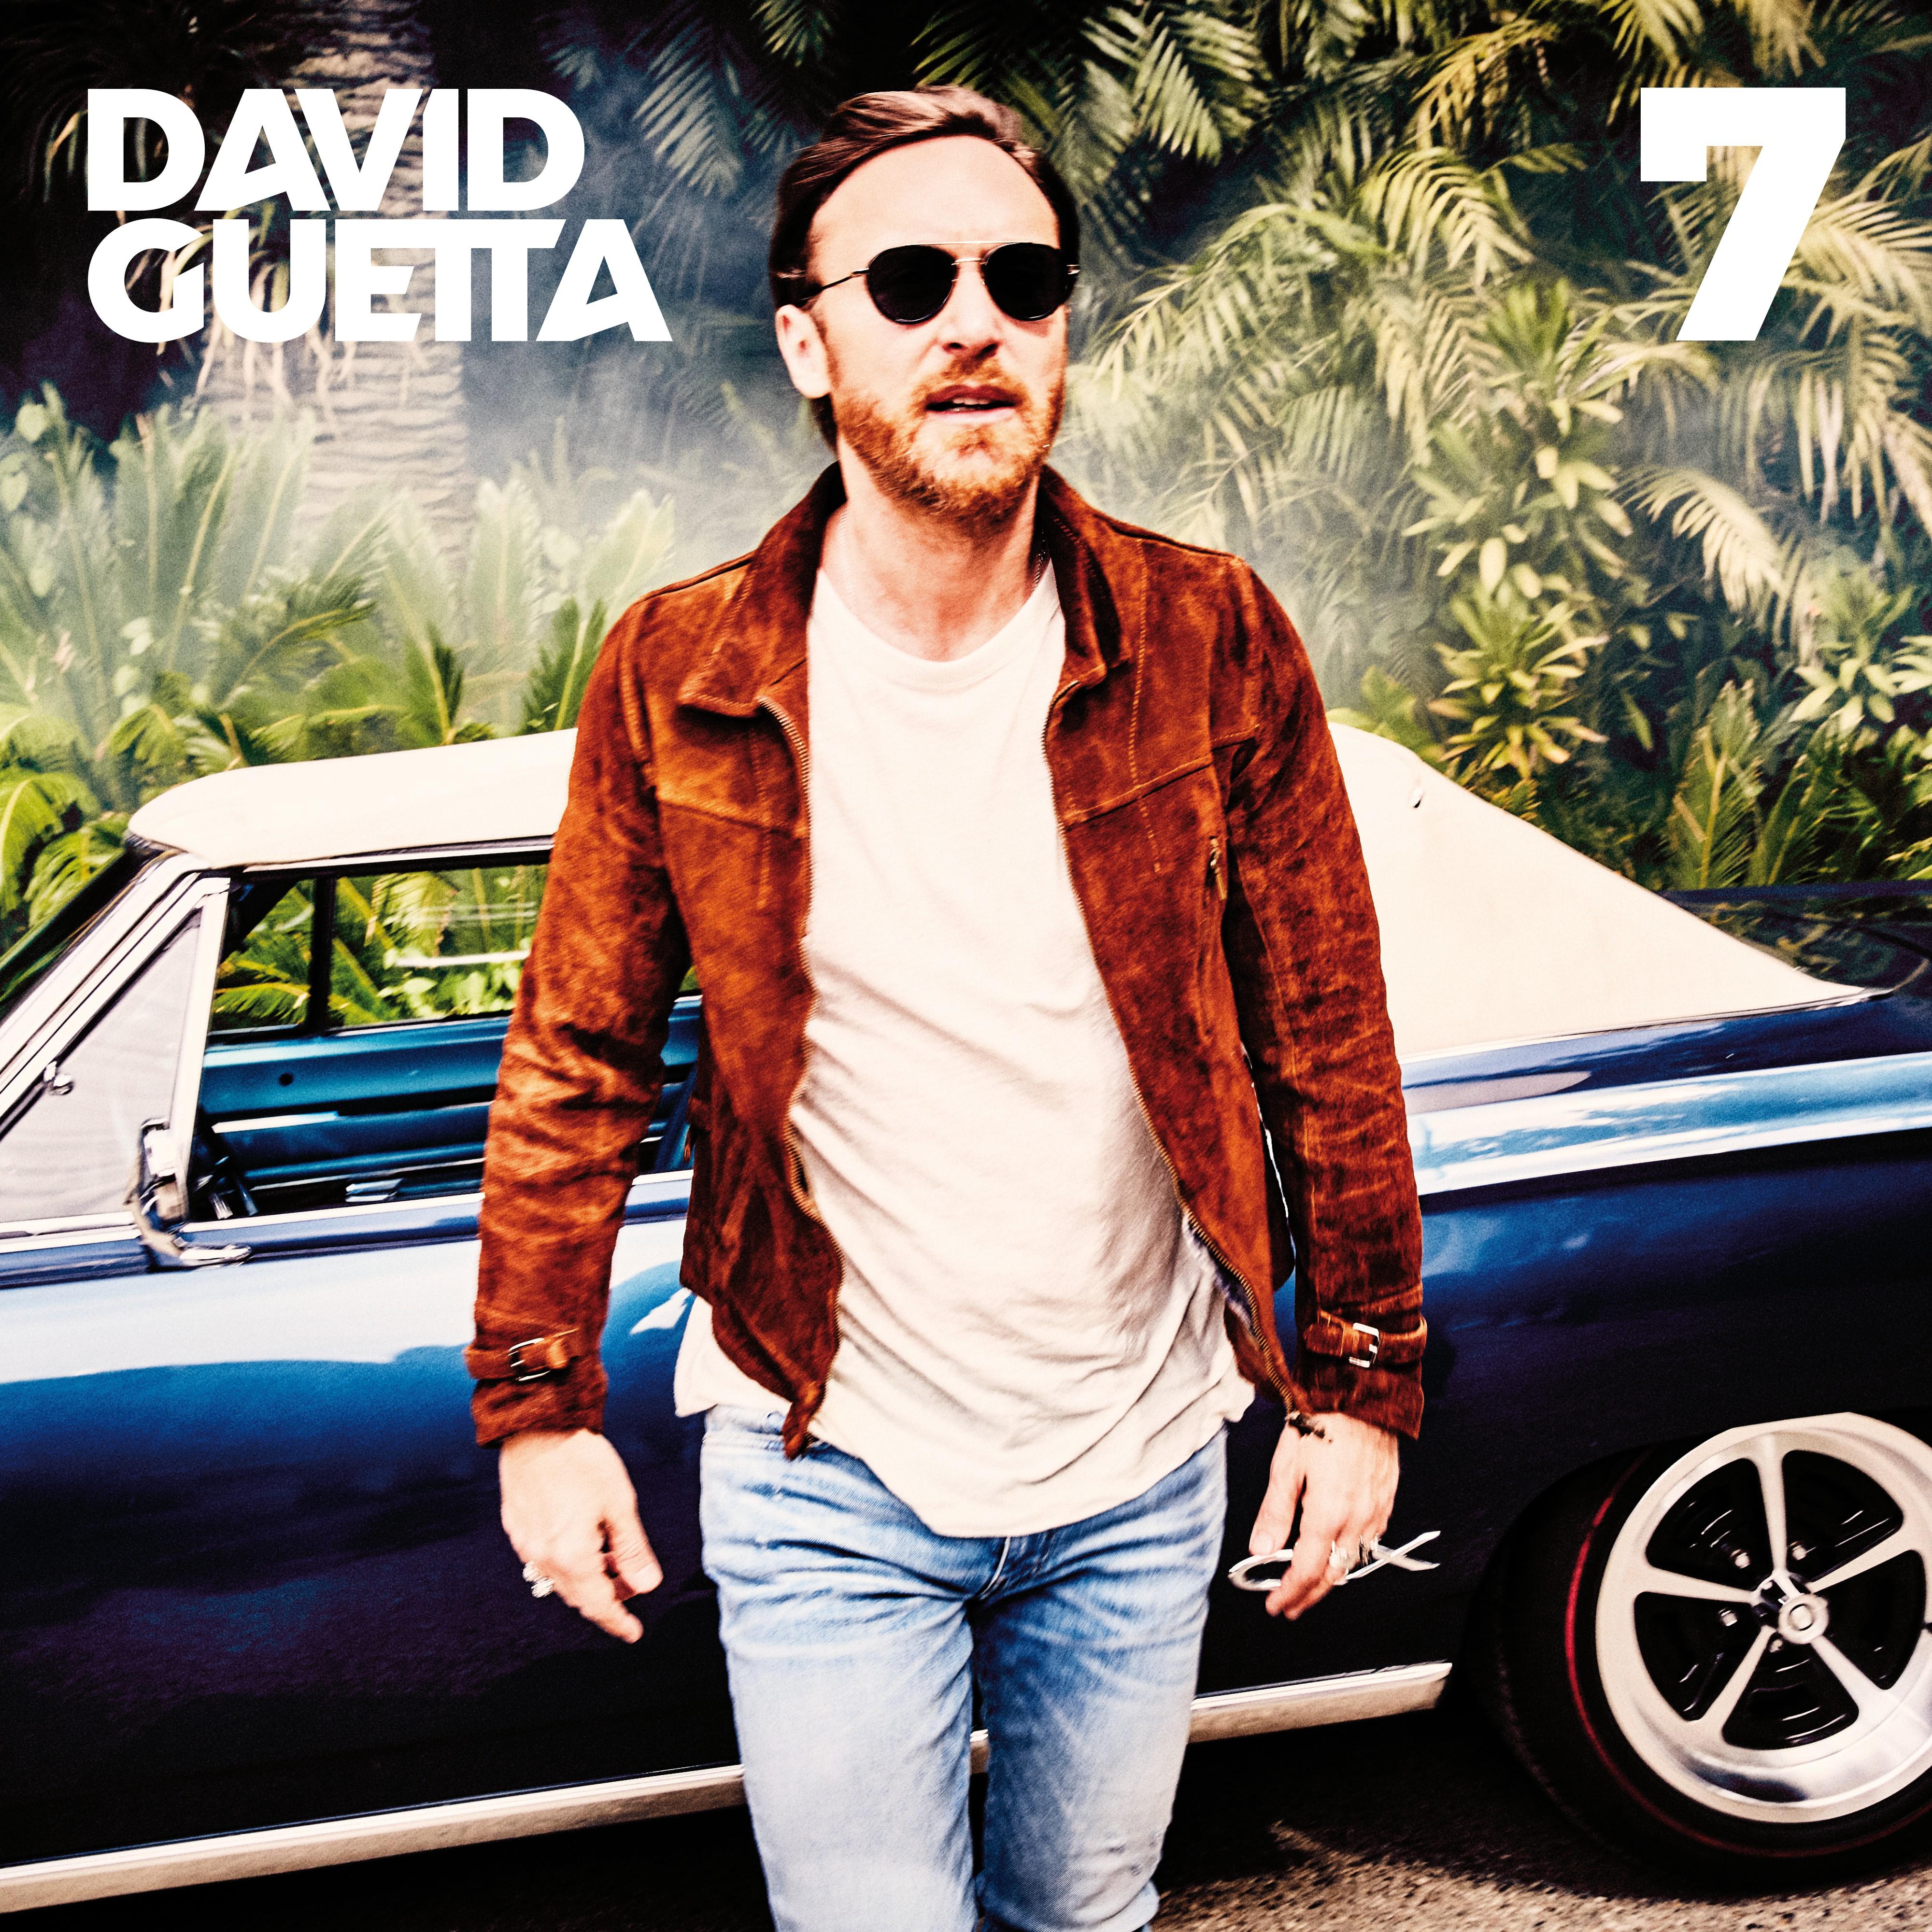 David Guetta - She Knows How To Love Me